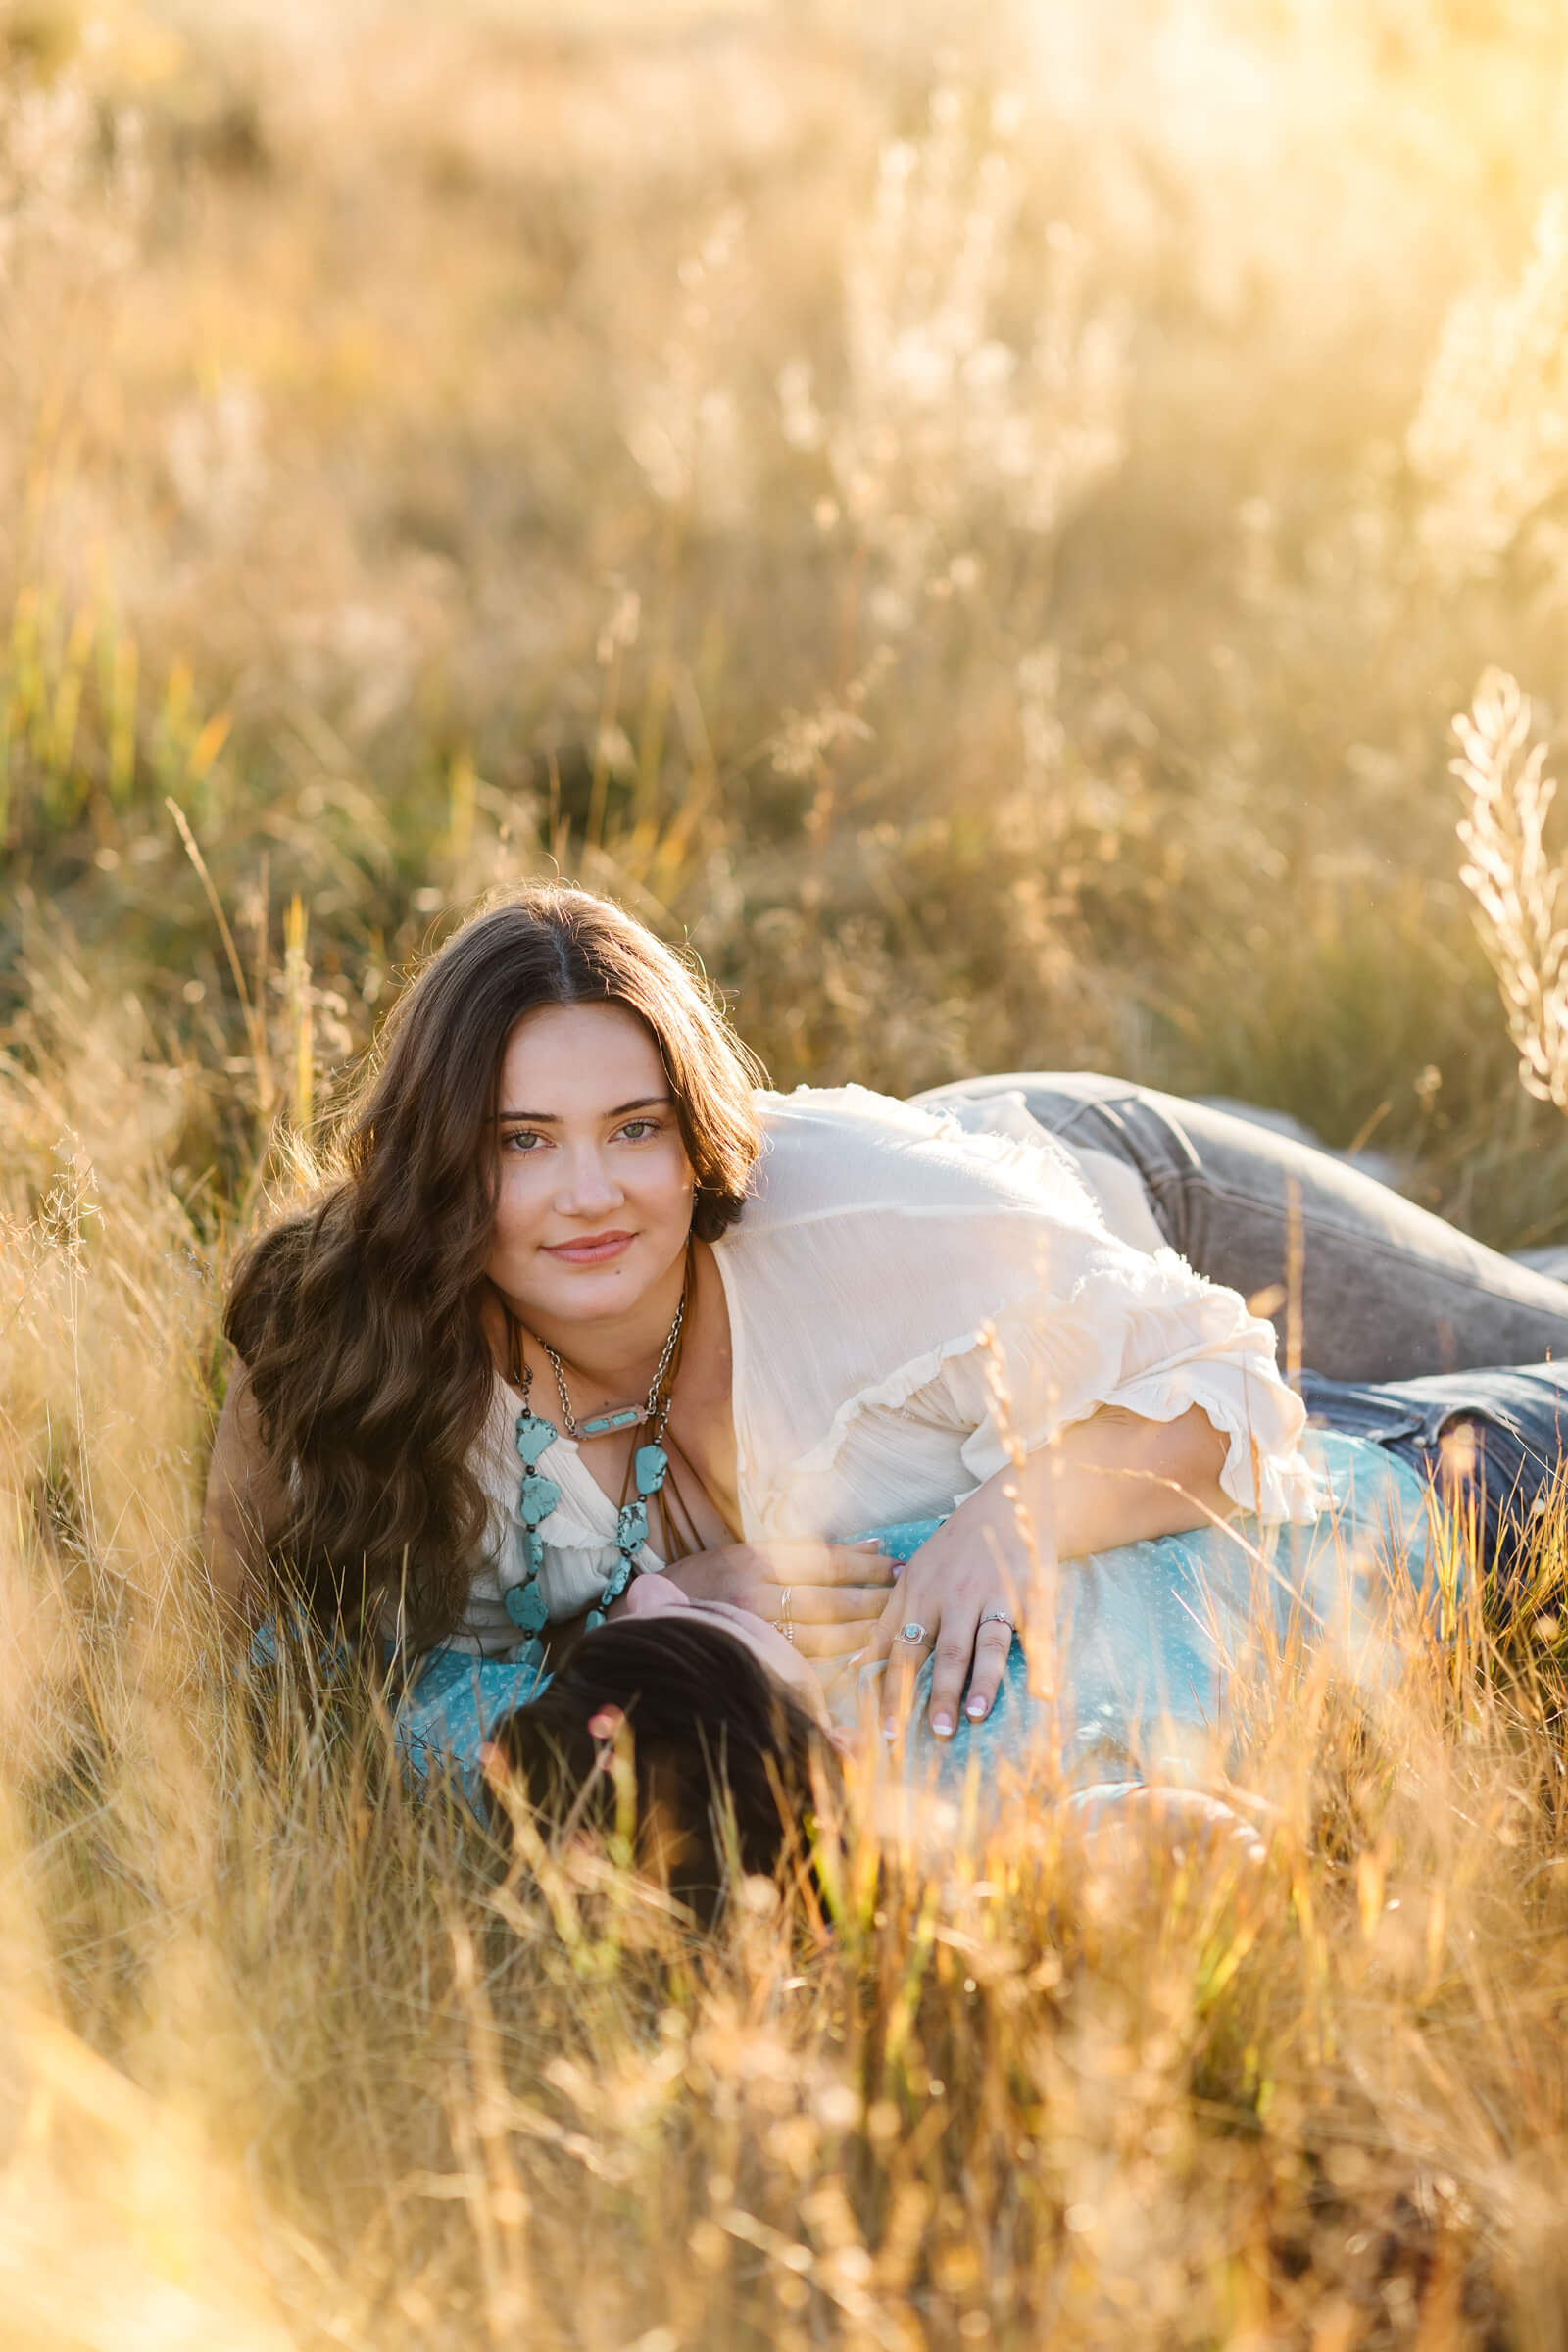 brunette girl in white laying with man in teal button up in golden hay field looks at camera